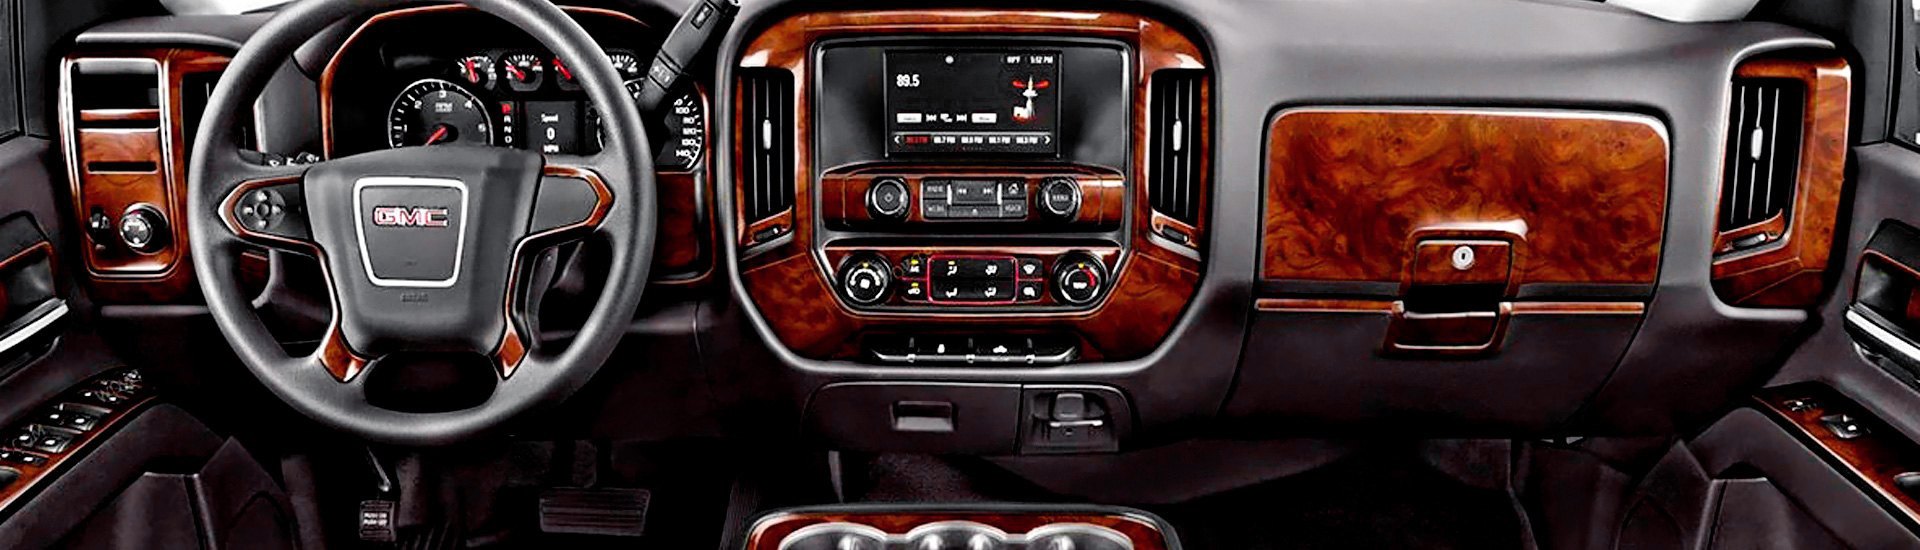 Upgrade the Interior Of Your ‘14-’18 Silverado / Sierra With Remin Dash Kit